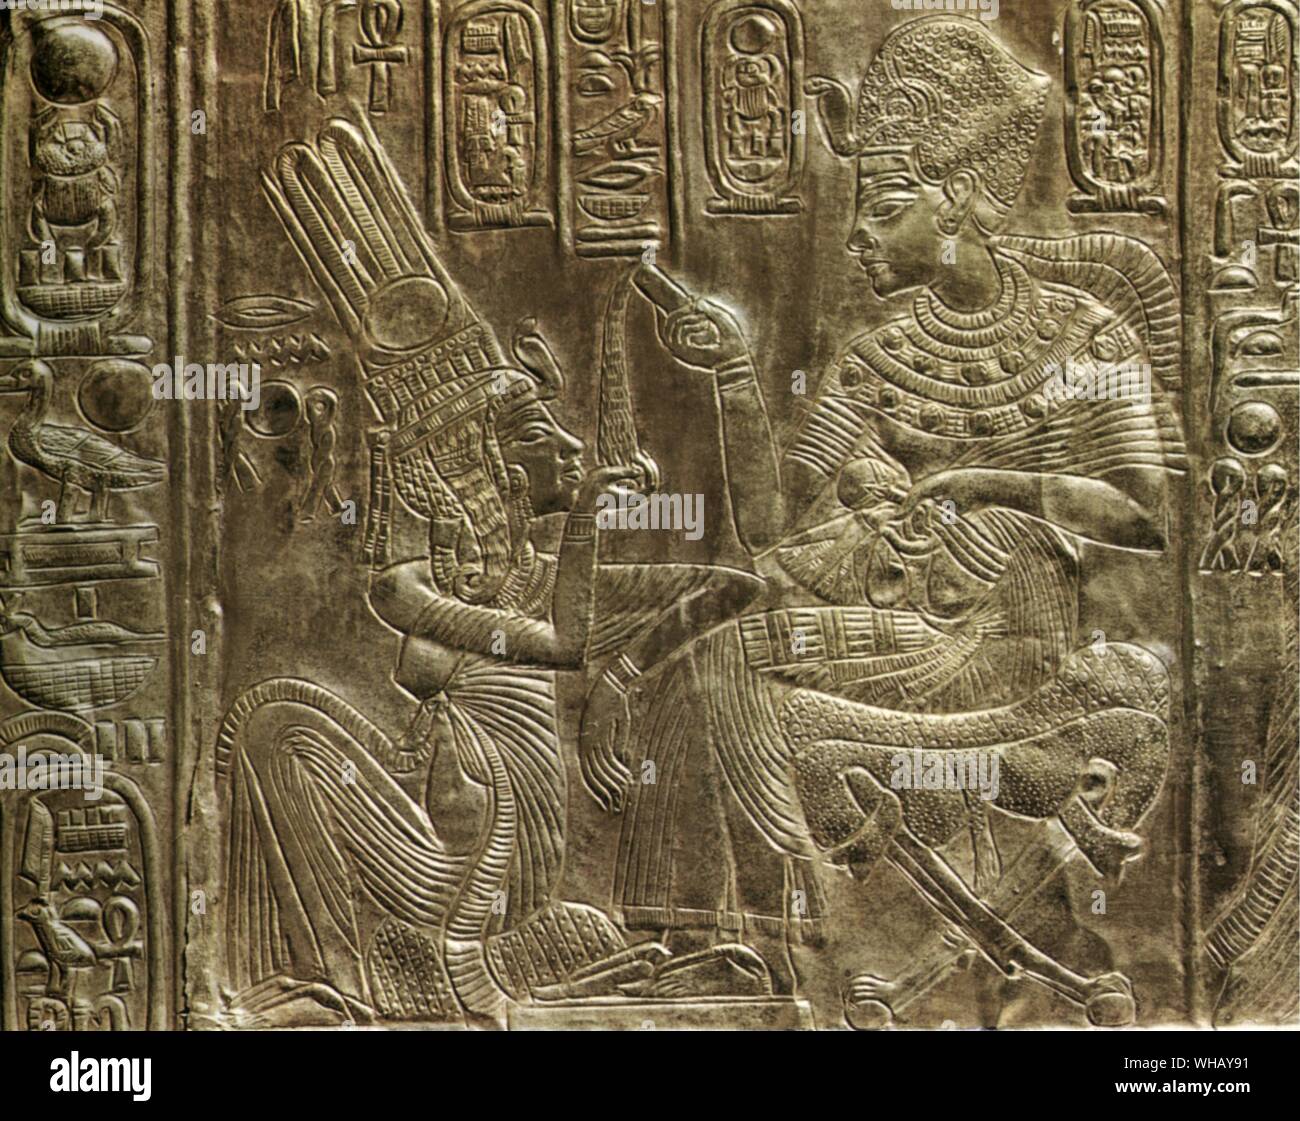 Details of the exterior of the gilt shrine. The king pours a perfumed liquid into the queen's hand. Tukankhamen, by Christiane Desroches Noblecourt, page 41.. The external walls and the doors of the shrine are subdivided into panels framed by hieroglyphic inscriptions with scenes showing Tutankhamun and his wife in various aspects of married life, a theme that recalls the scenes of the Amarna Period. The entire decorative scheme of the shrine has strong symbolic connotations associated with the religious and political spheres. The intimate ties between the pharaoh and his bride represent the Stock Photo